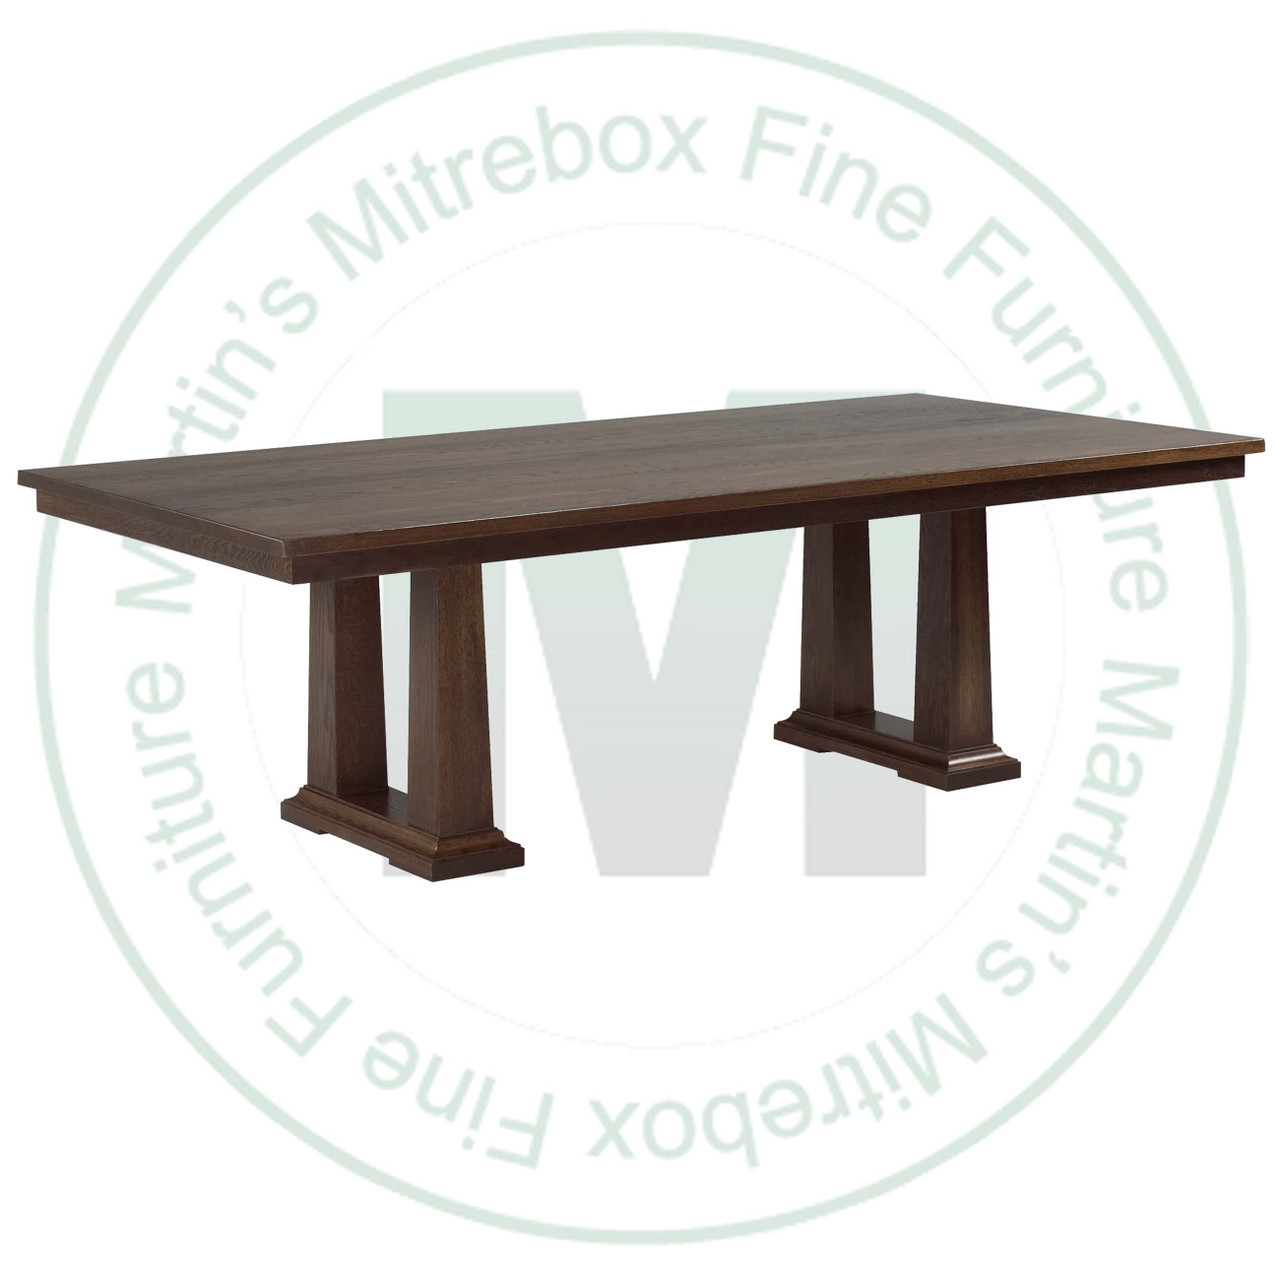 Maple Acropolis Extension Double Pedestal Table 42''D x 72''W x 30''H With 4 - 12'' Leaves Table Has 1.25'' Thick Top